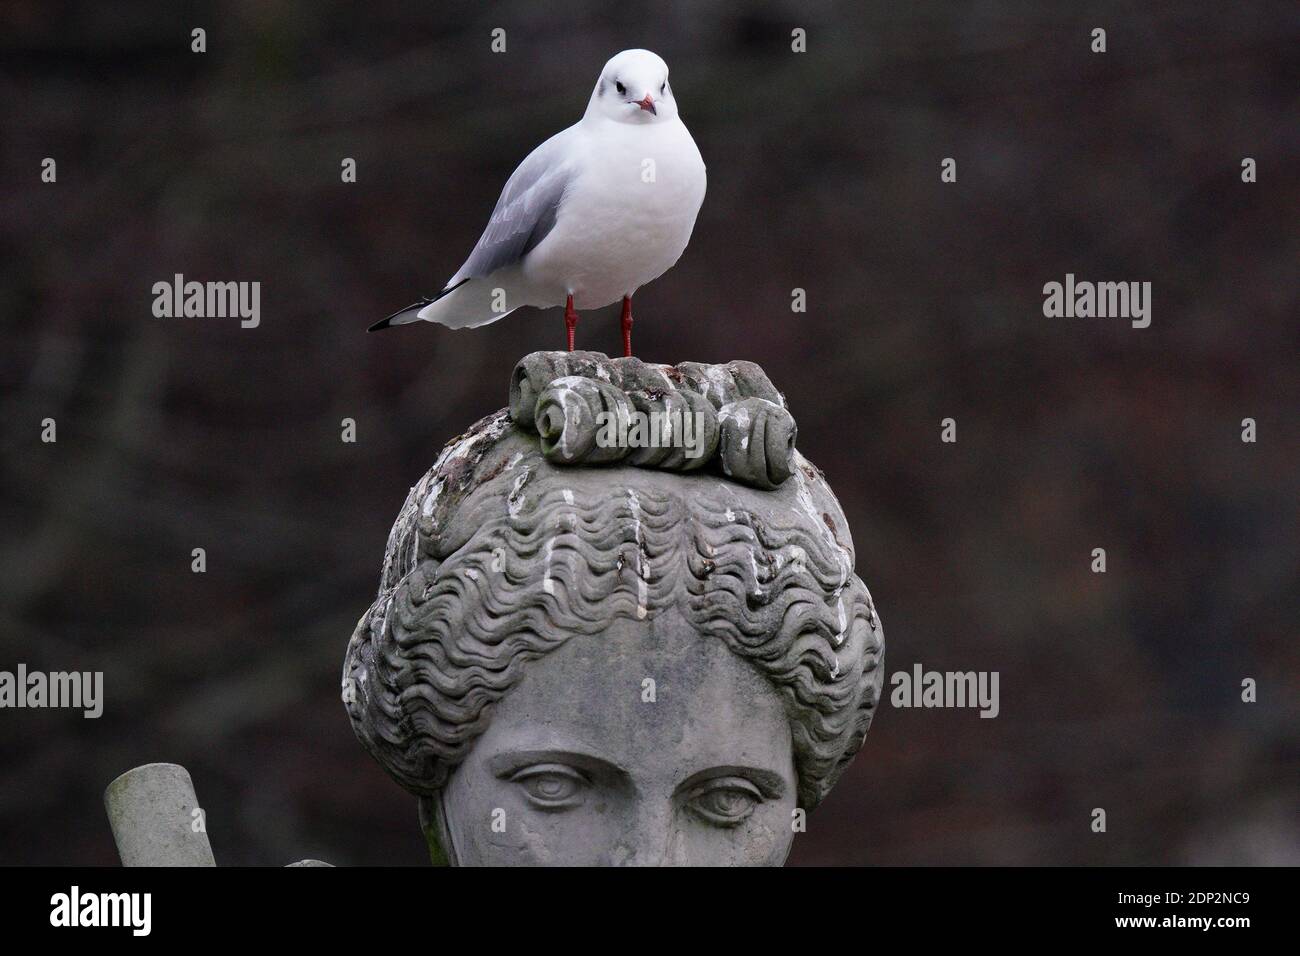 A seagull is seen sitting on a sculpture in the Royal Baths Park in Warsaw, Poland on December 18, 2020. Stock Photo